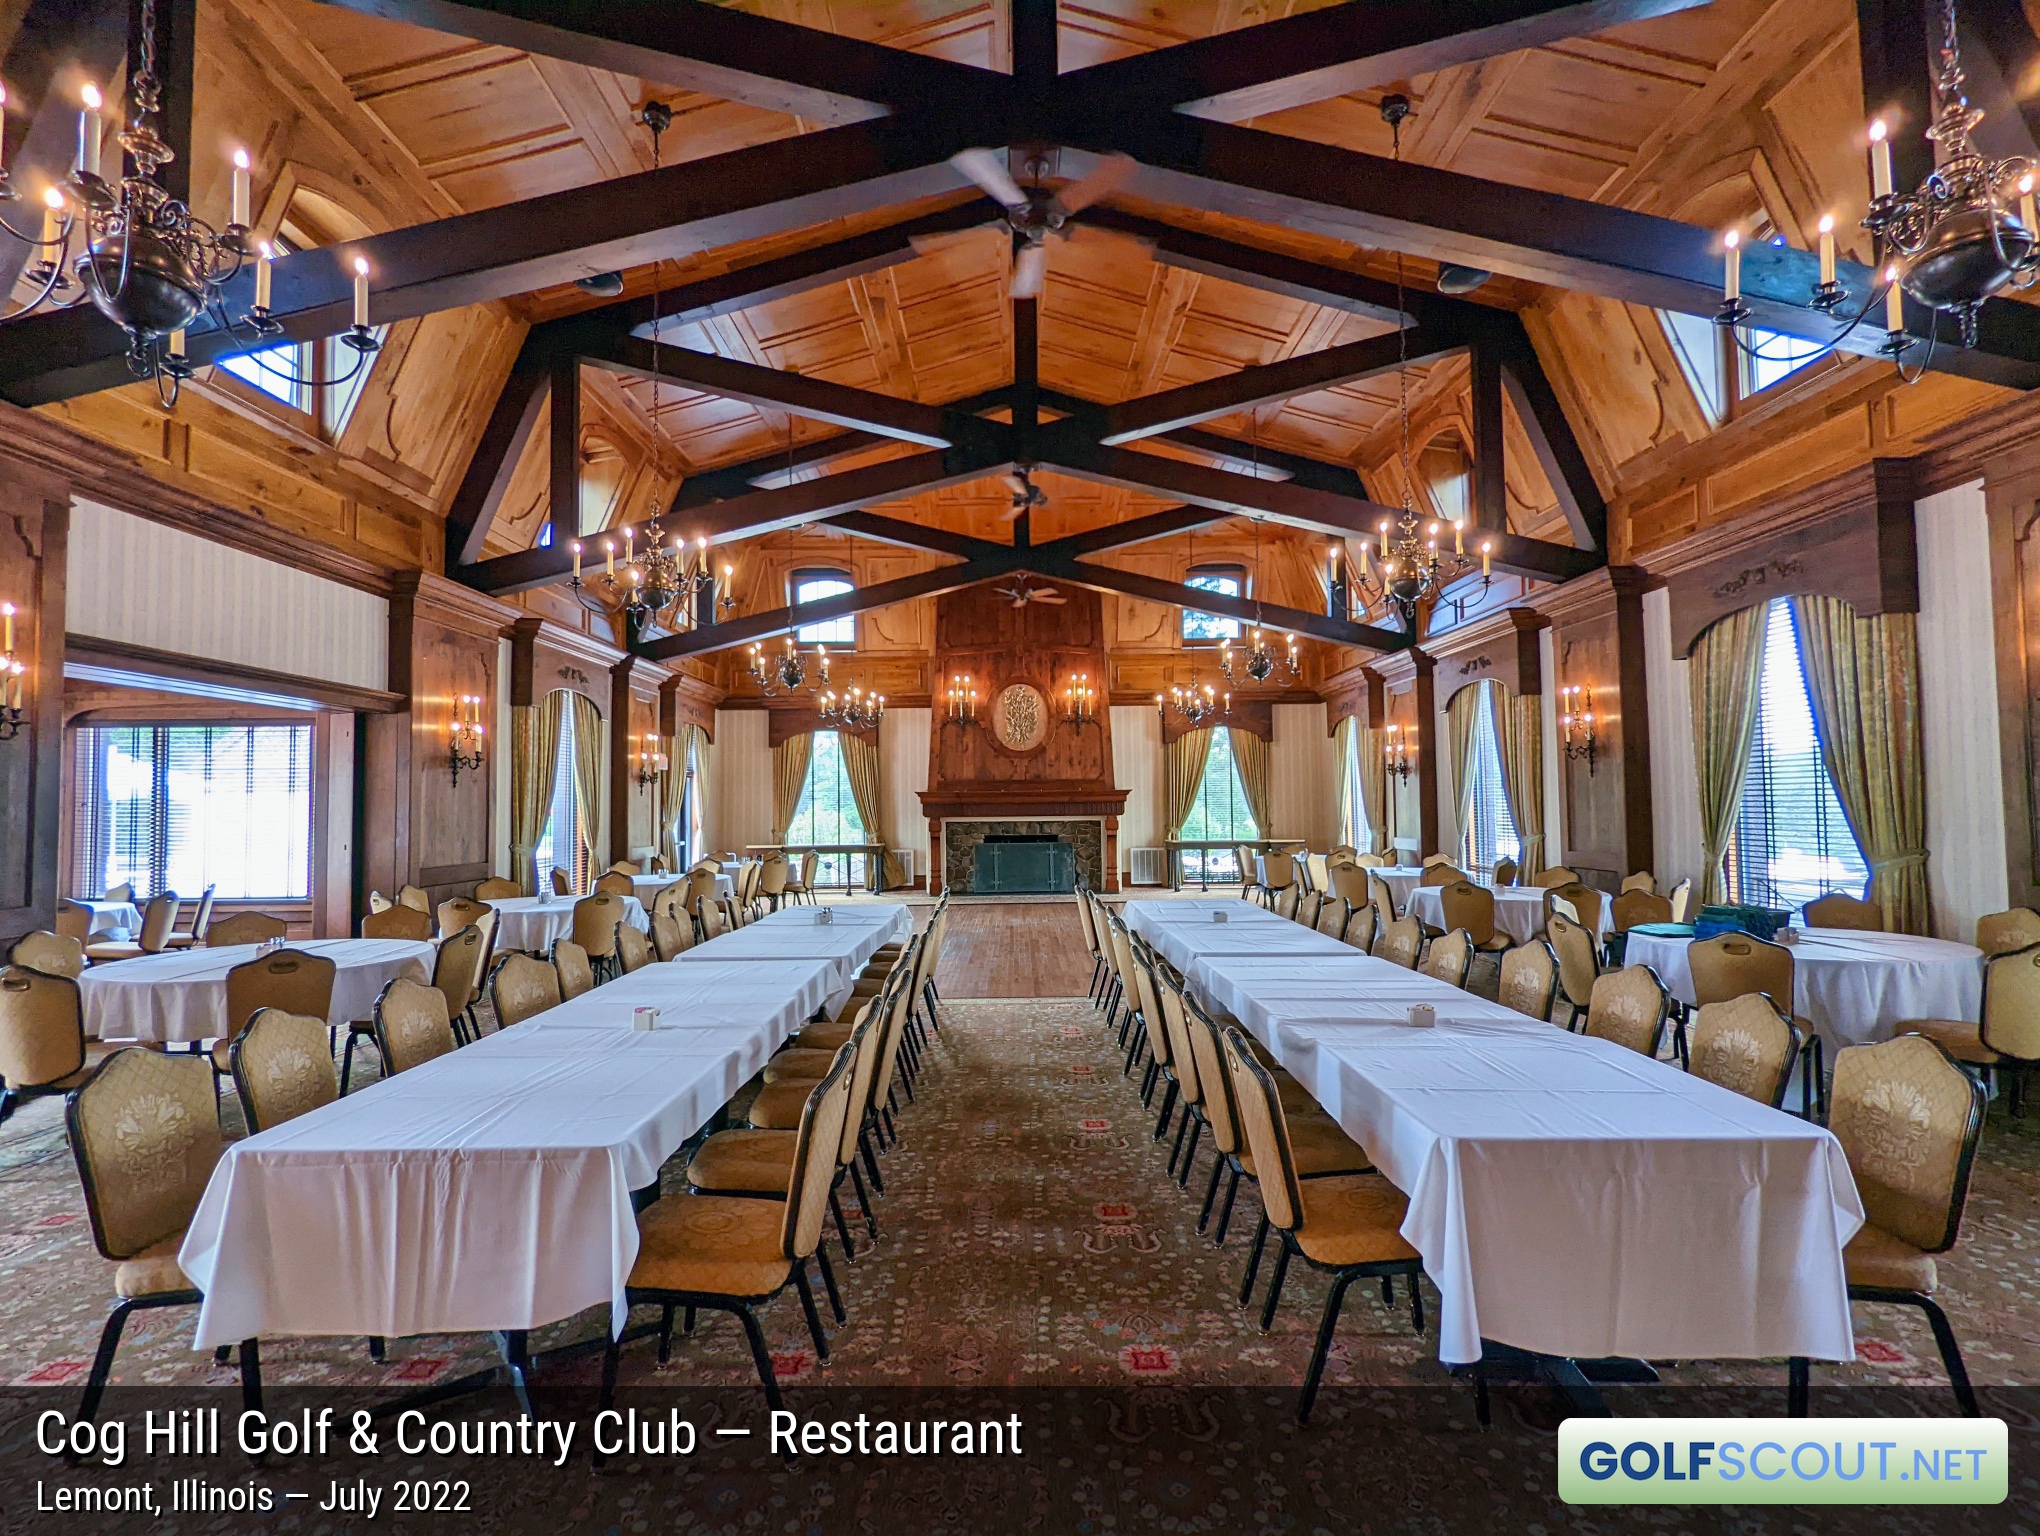 Photo of the restaurant at Cog Hill Course #3 in Lemont, Illinois. The beautiful main dining hall at Cog Hill's clubhouse.